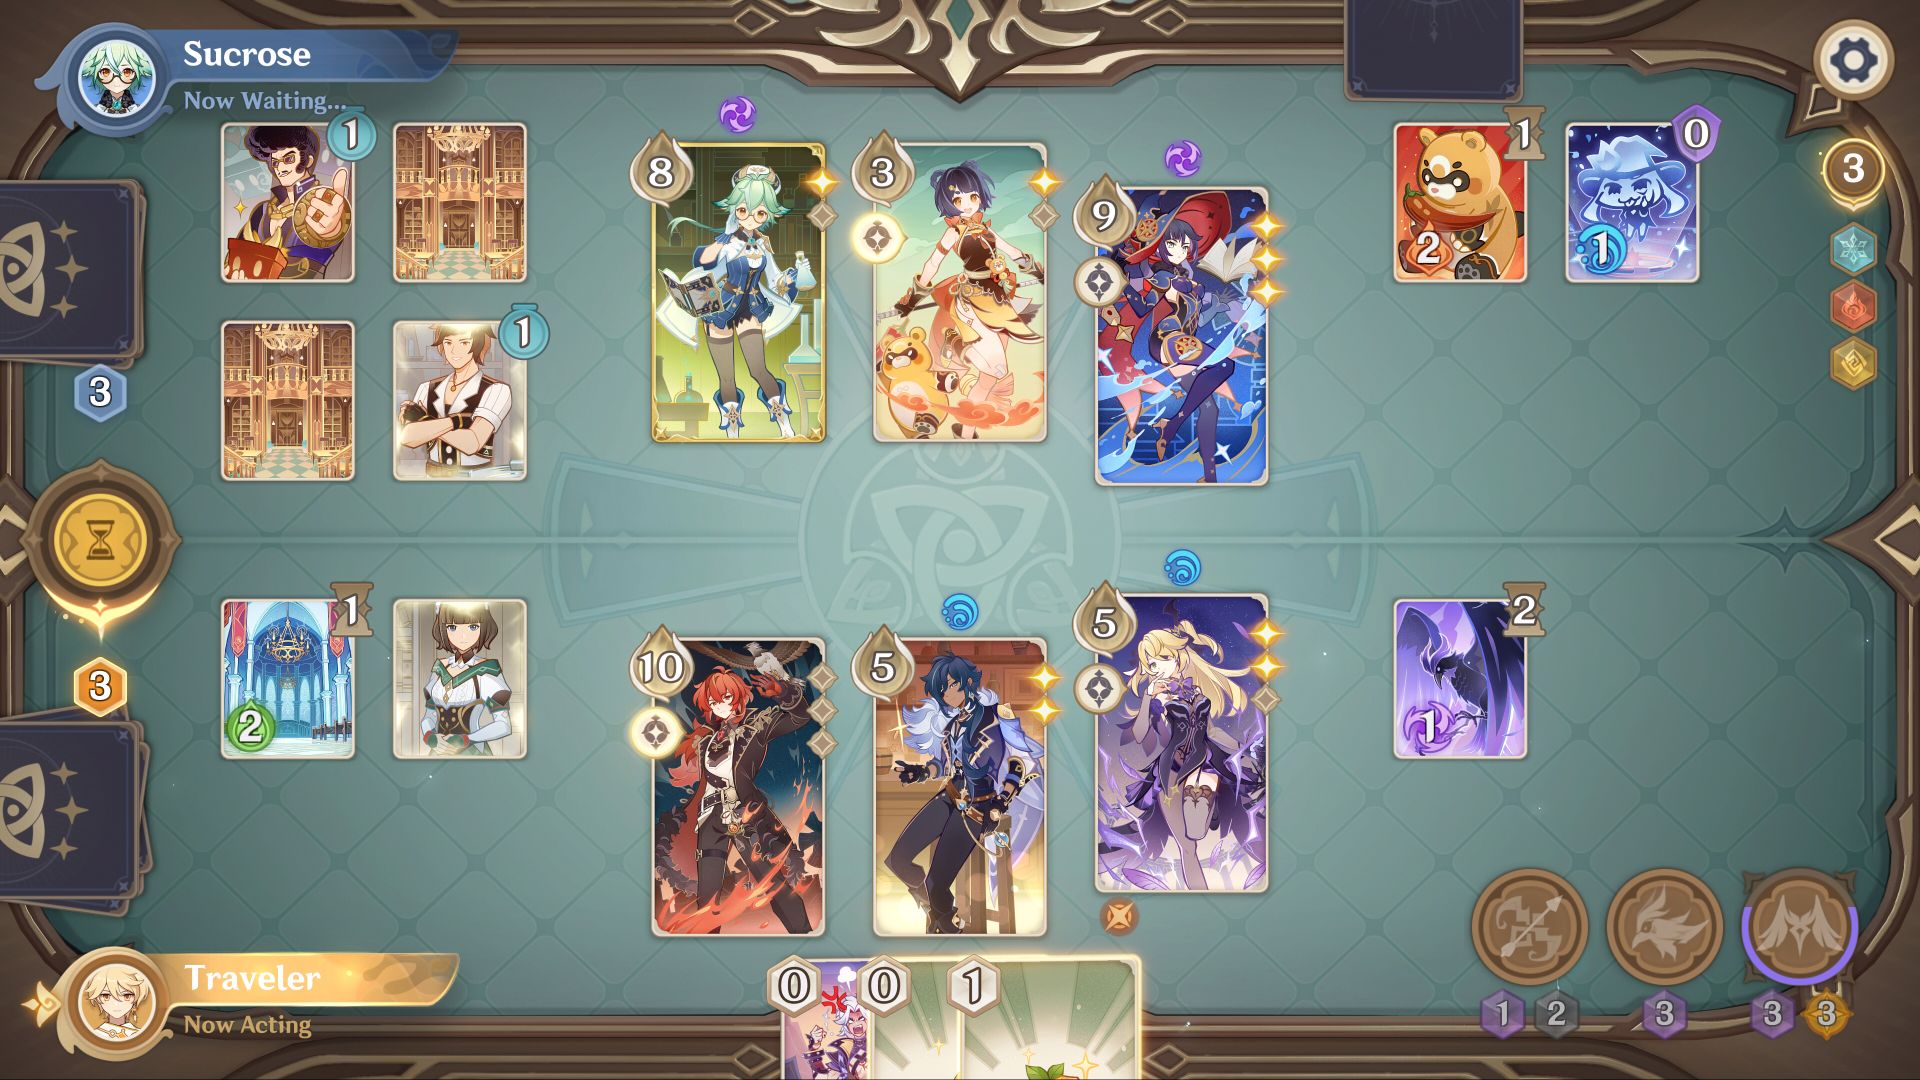 Genshin Impact update 3.3 adds an entire trading card game